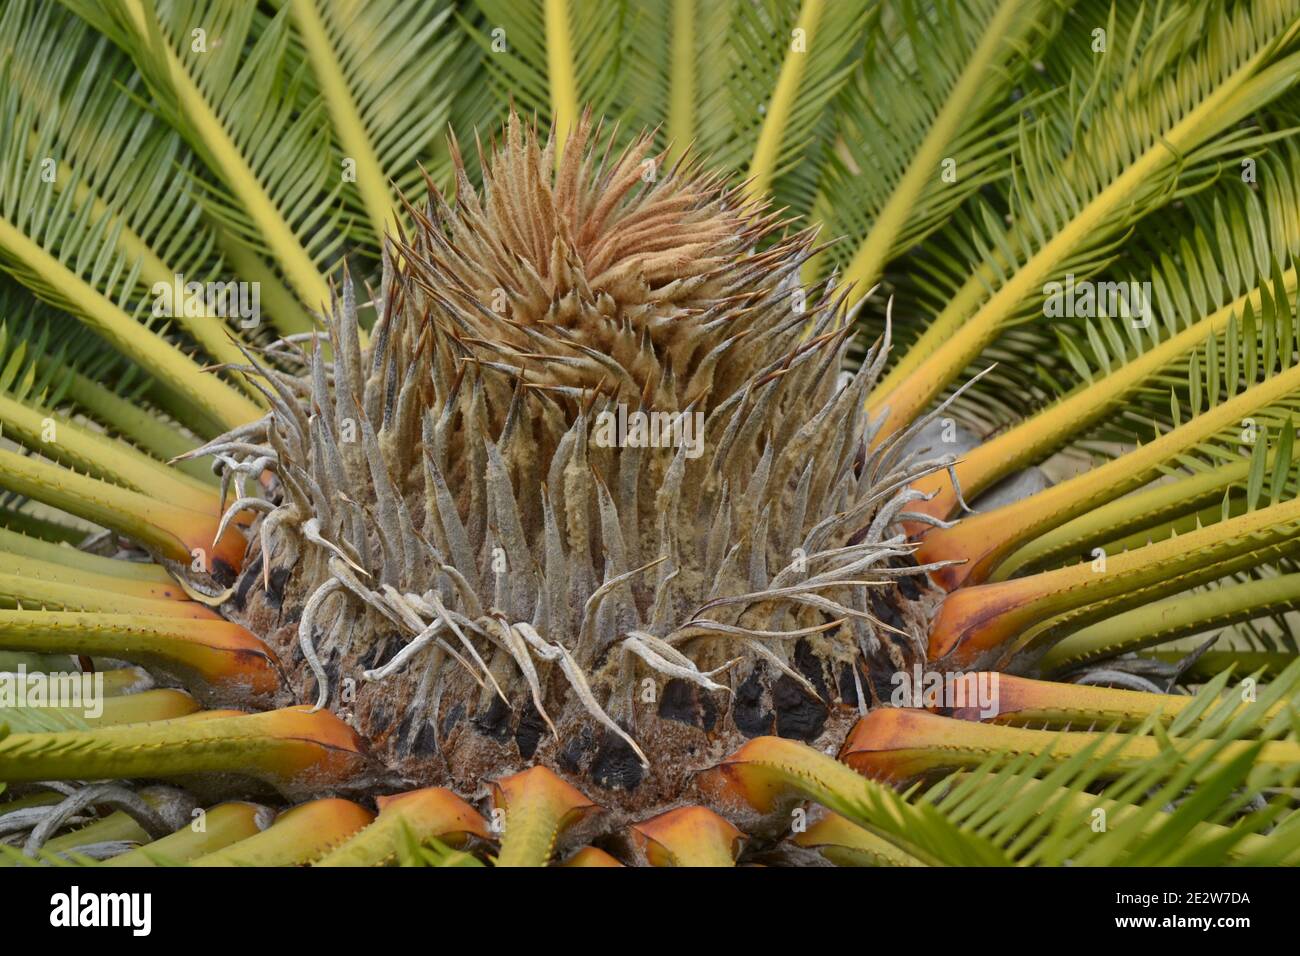 Tropical plant in a square known as the sago palm that dates back to the Jurassic period color photo with details Stock Photo